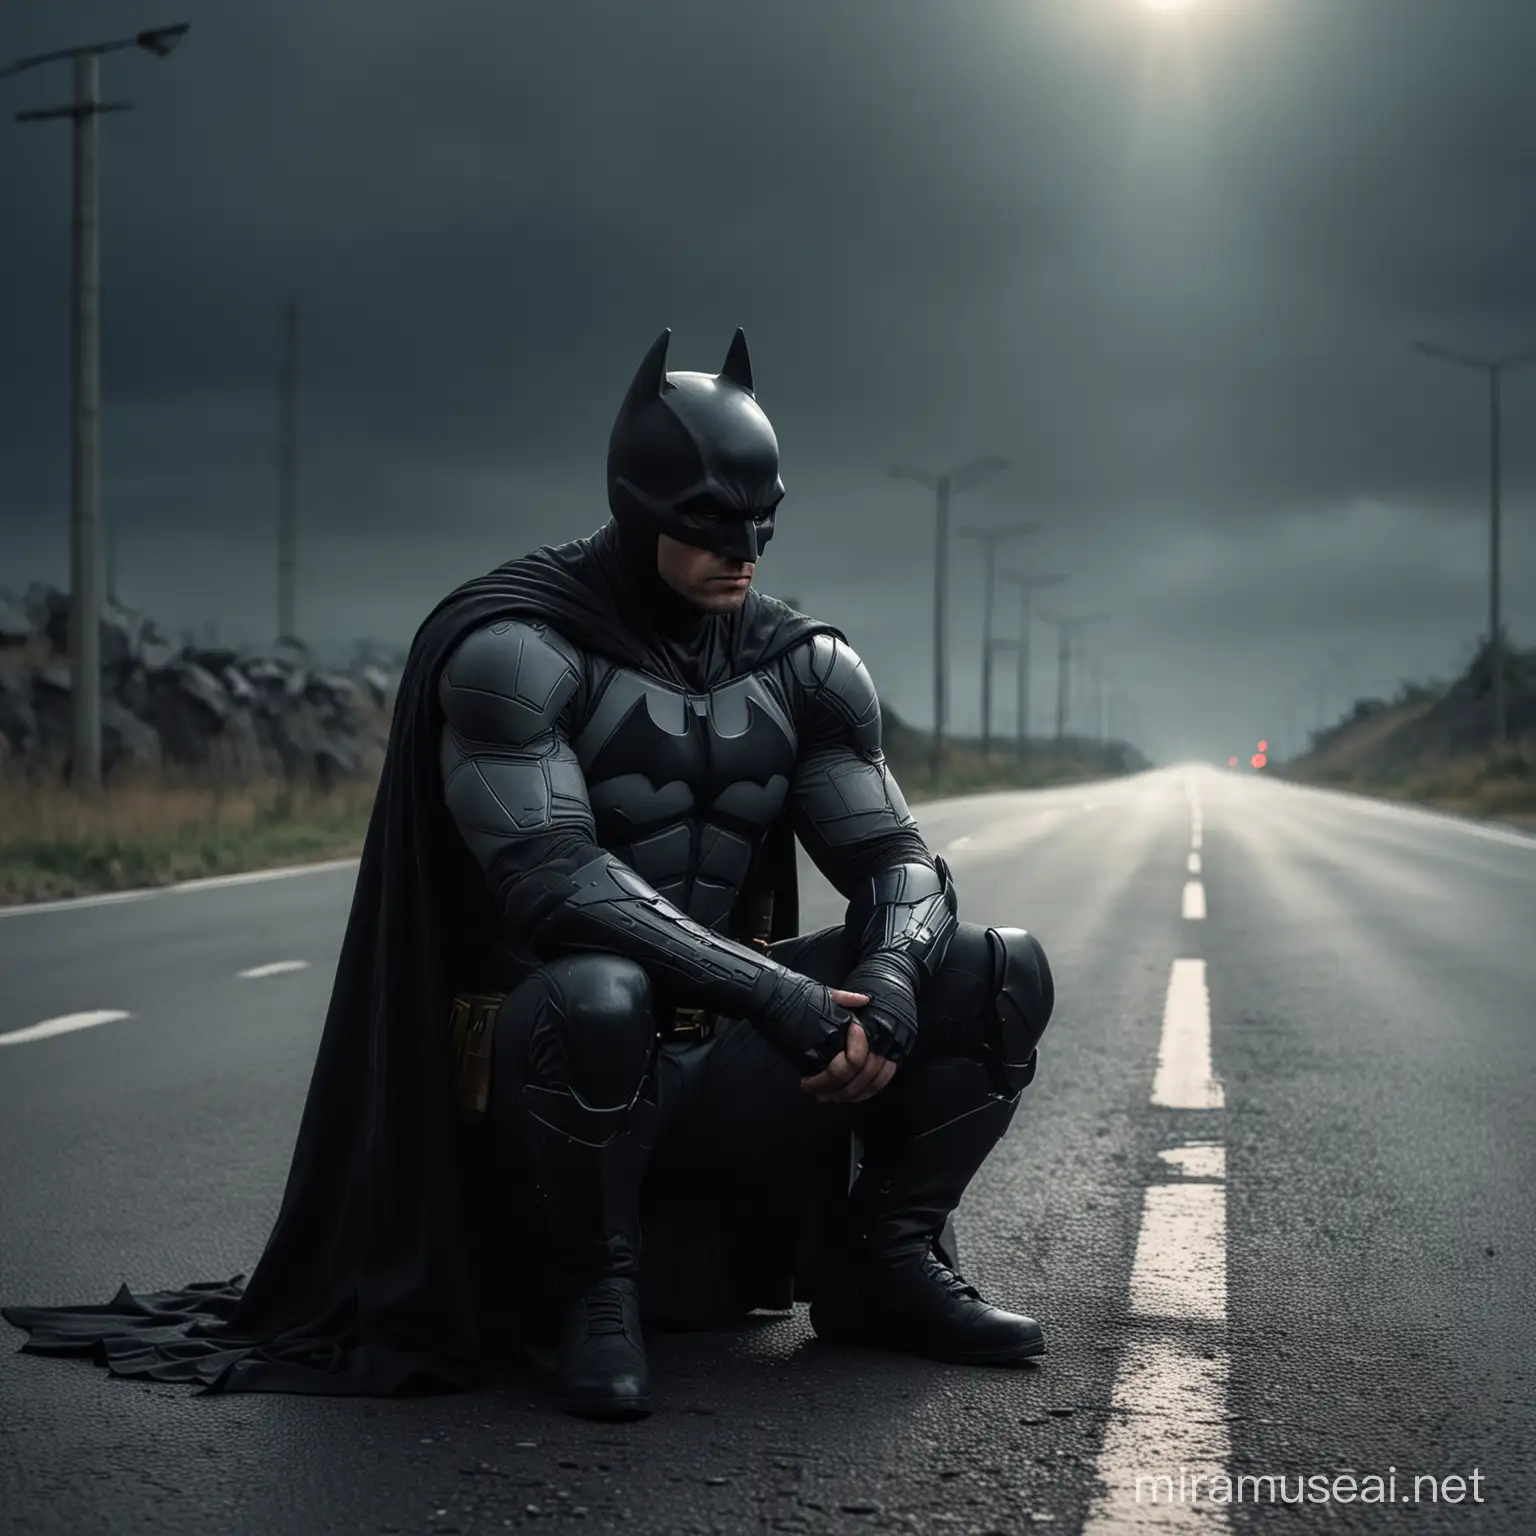 Sad man, look like batman, sitting down alone on road, look up and thinking, cinematic background 